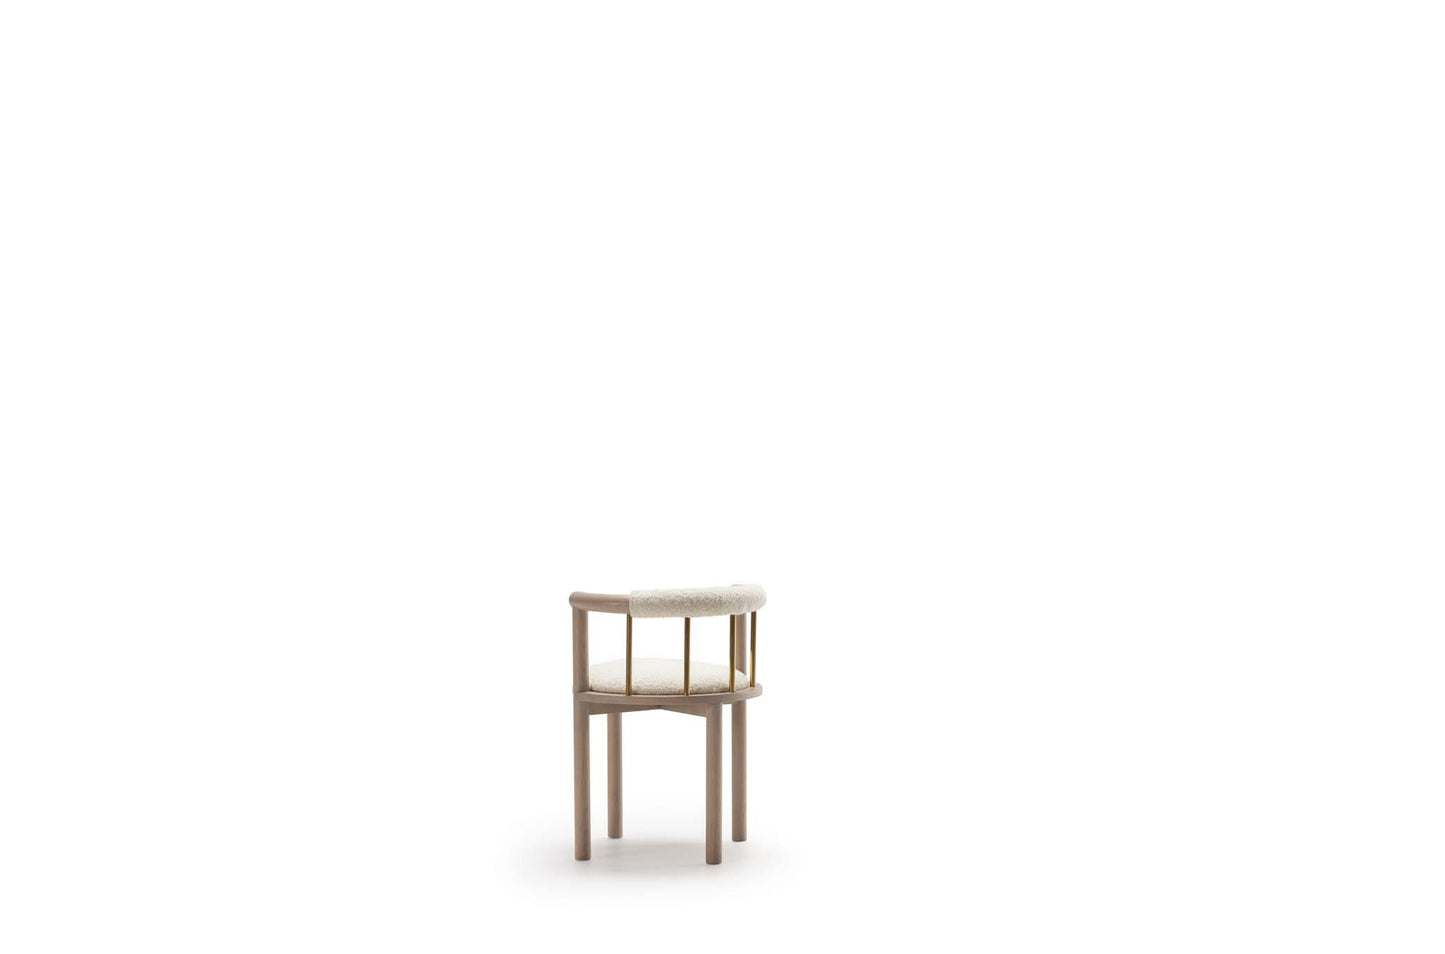 Anderson Dining Chair - Snow